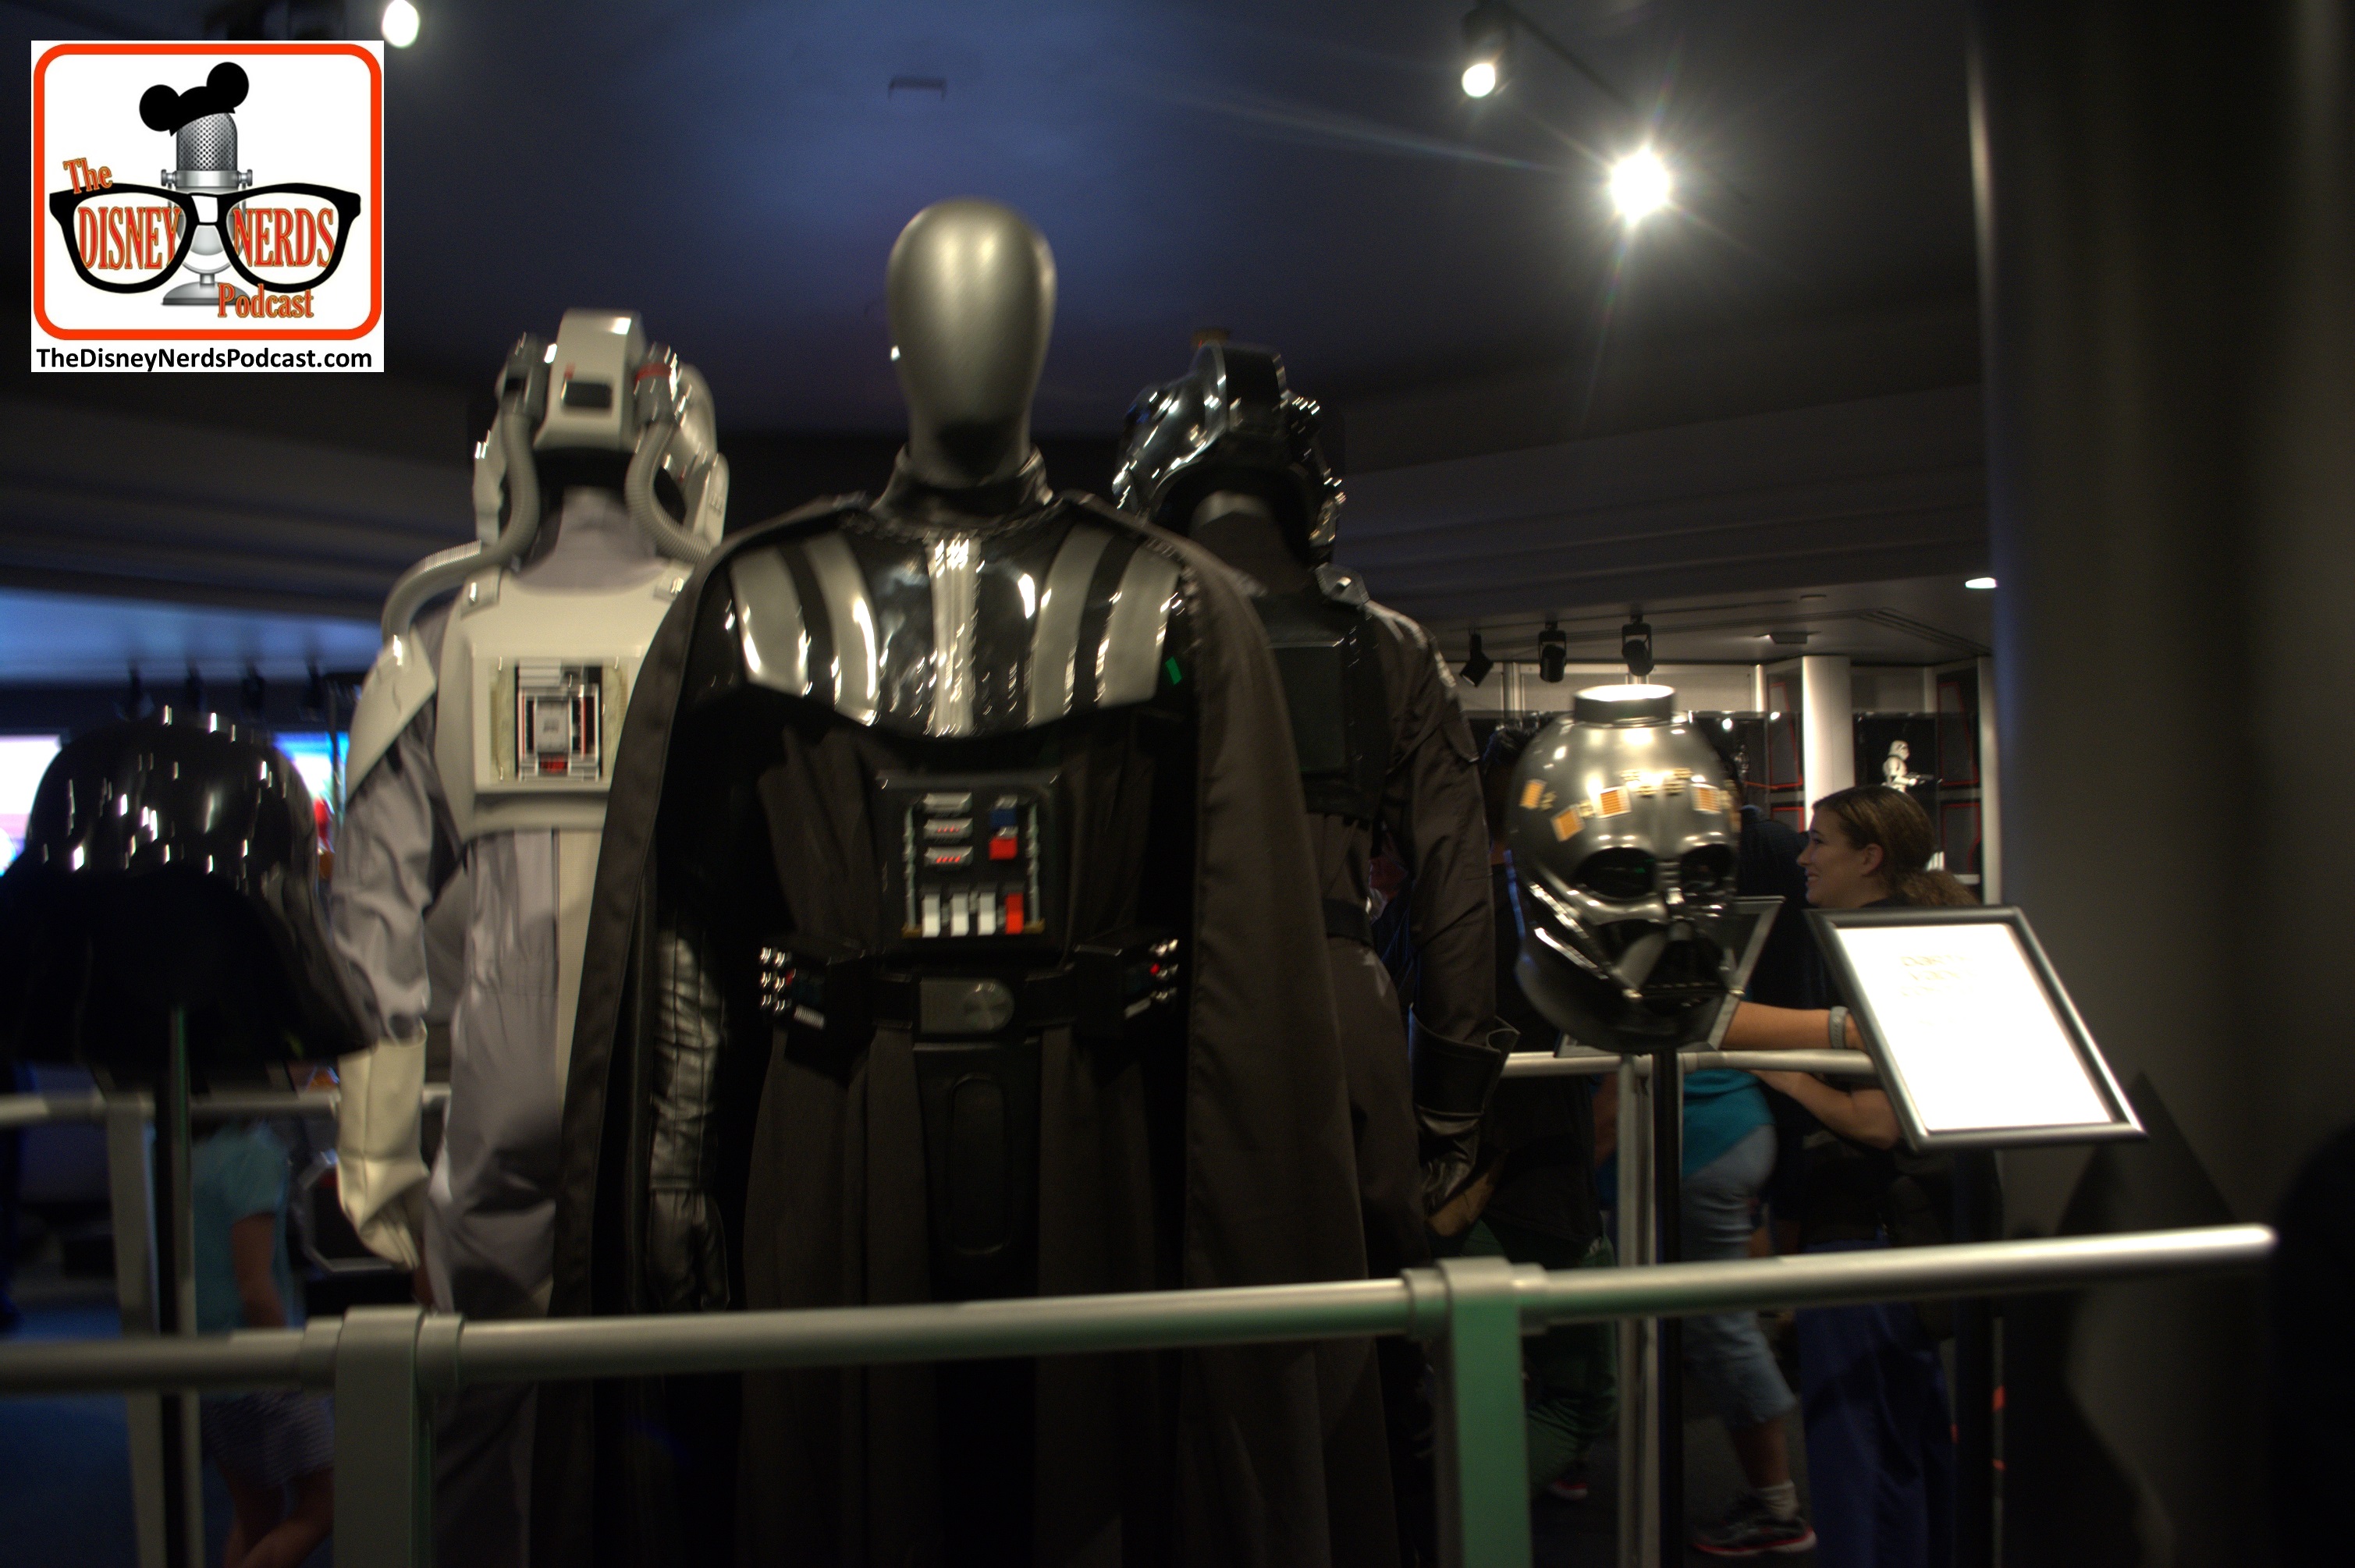 2015-12 - Hollywood Studios Launch Bay Props and full costumes for sale in the gift shop